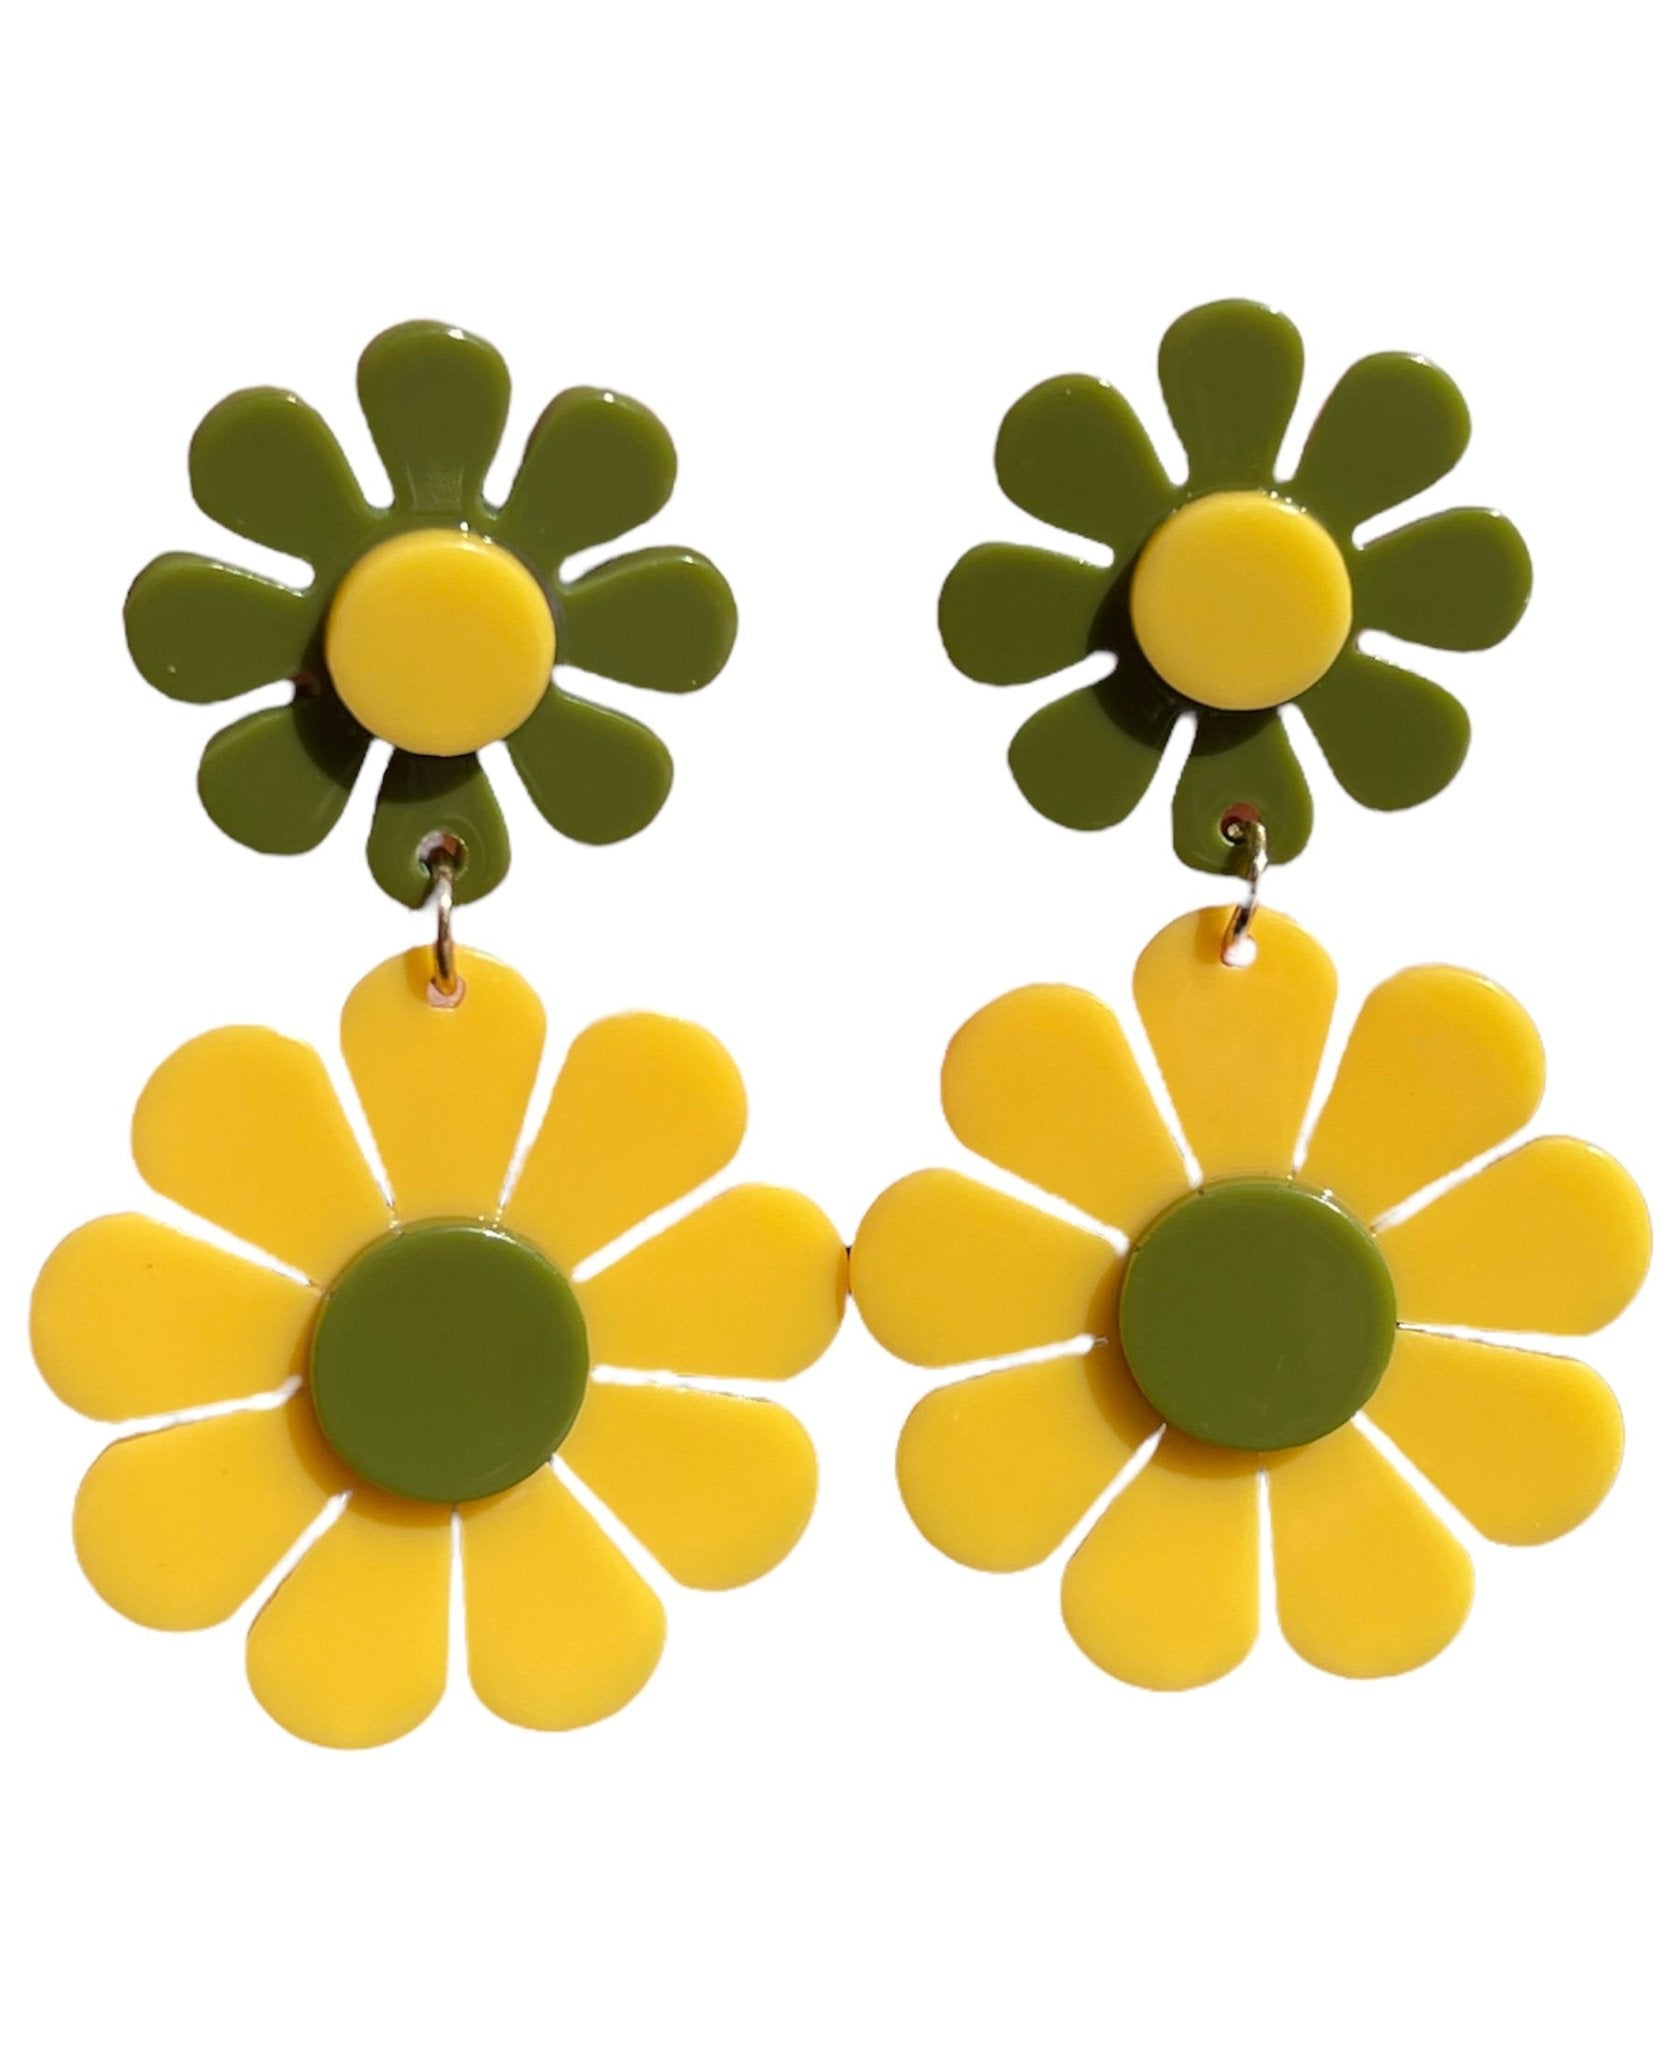 70s Yellow and Green Flower Power Earrings - Relic828